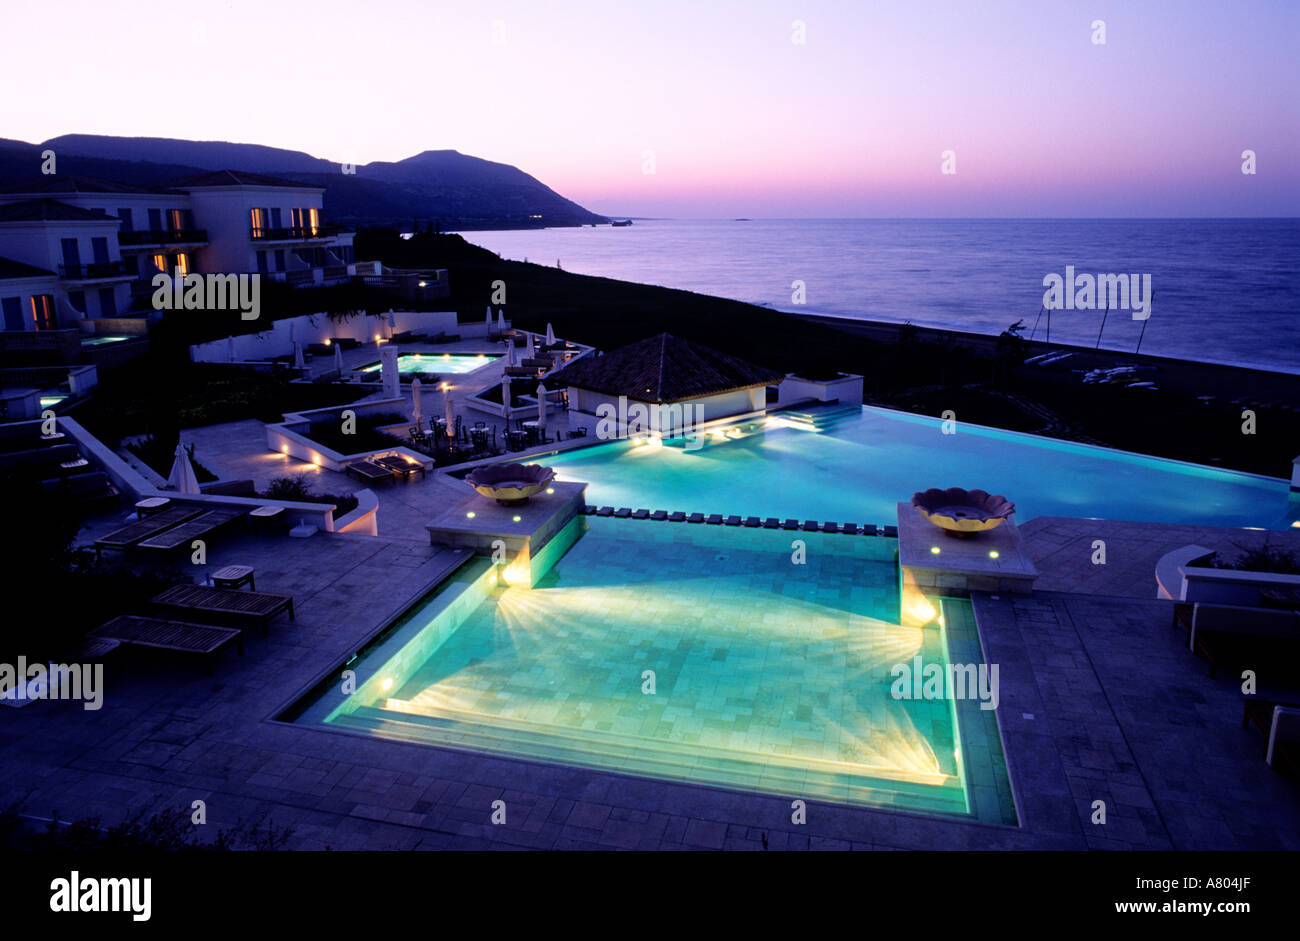 Cyprus, Pafos District, Akamas Peninsula, Anassa Hotel with its swimming pool in front of the sea Stock Photo